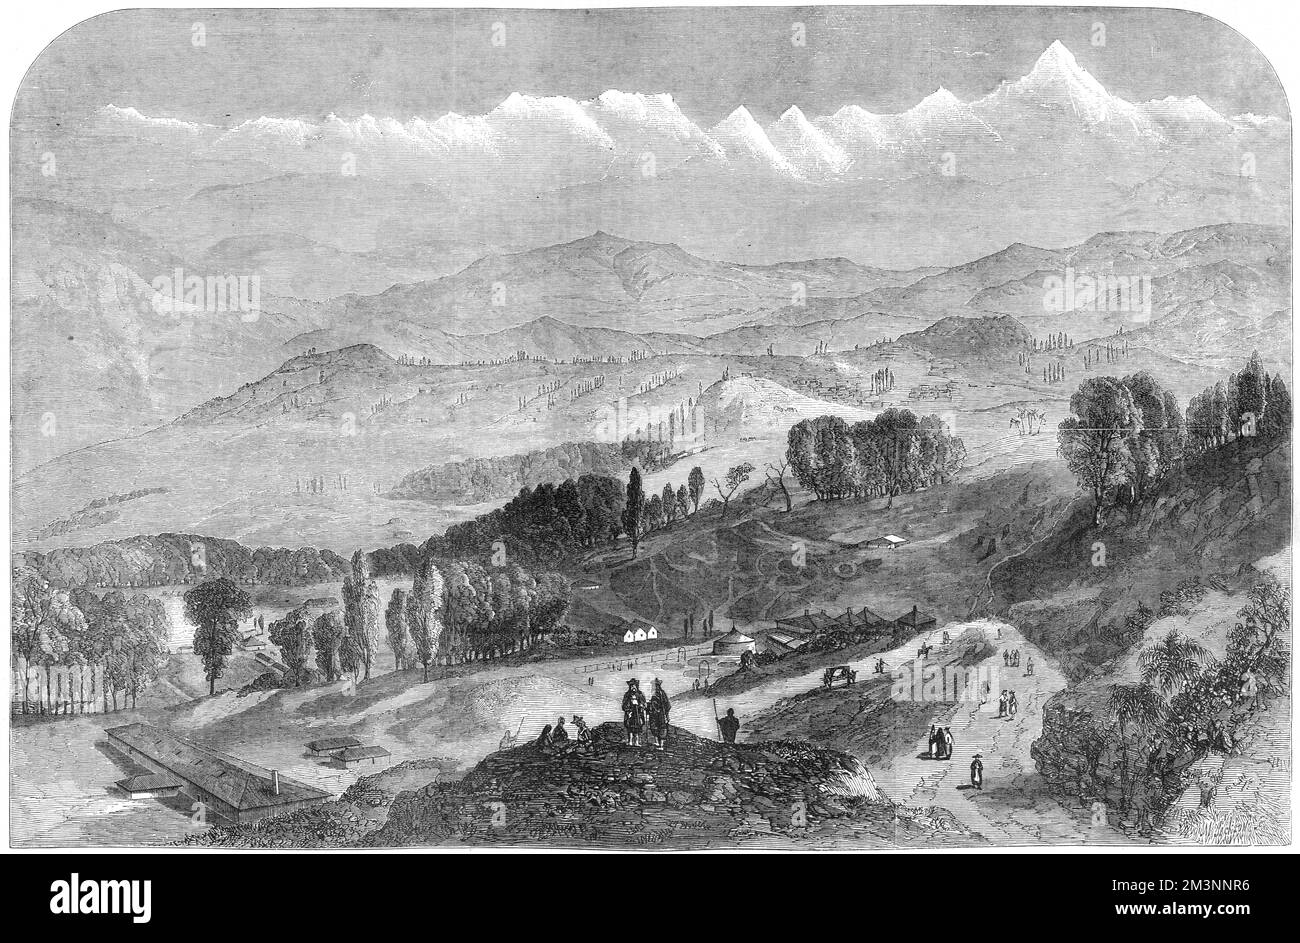 A view from Darjeeling of the Himalayan mountain range including, to the right, Deodhunga. Following observations by James Nicolson, and subsequent calculations by Andrew Waugh, the British Surveyor General of India, it was decided that this was probably the highest mountain in the world. In 1856 Waugh proposed that it be called Mount Everest, after his chief and predecessor in office, Colonel Geroge Everest. Although the naming was opposed in some quarters, including by George Everest himself, in 1865 it was adopted by the Royal Geographical Society.     Date: 1857 Stock Photo